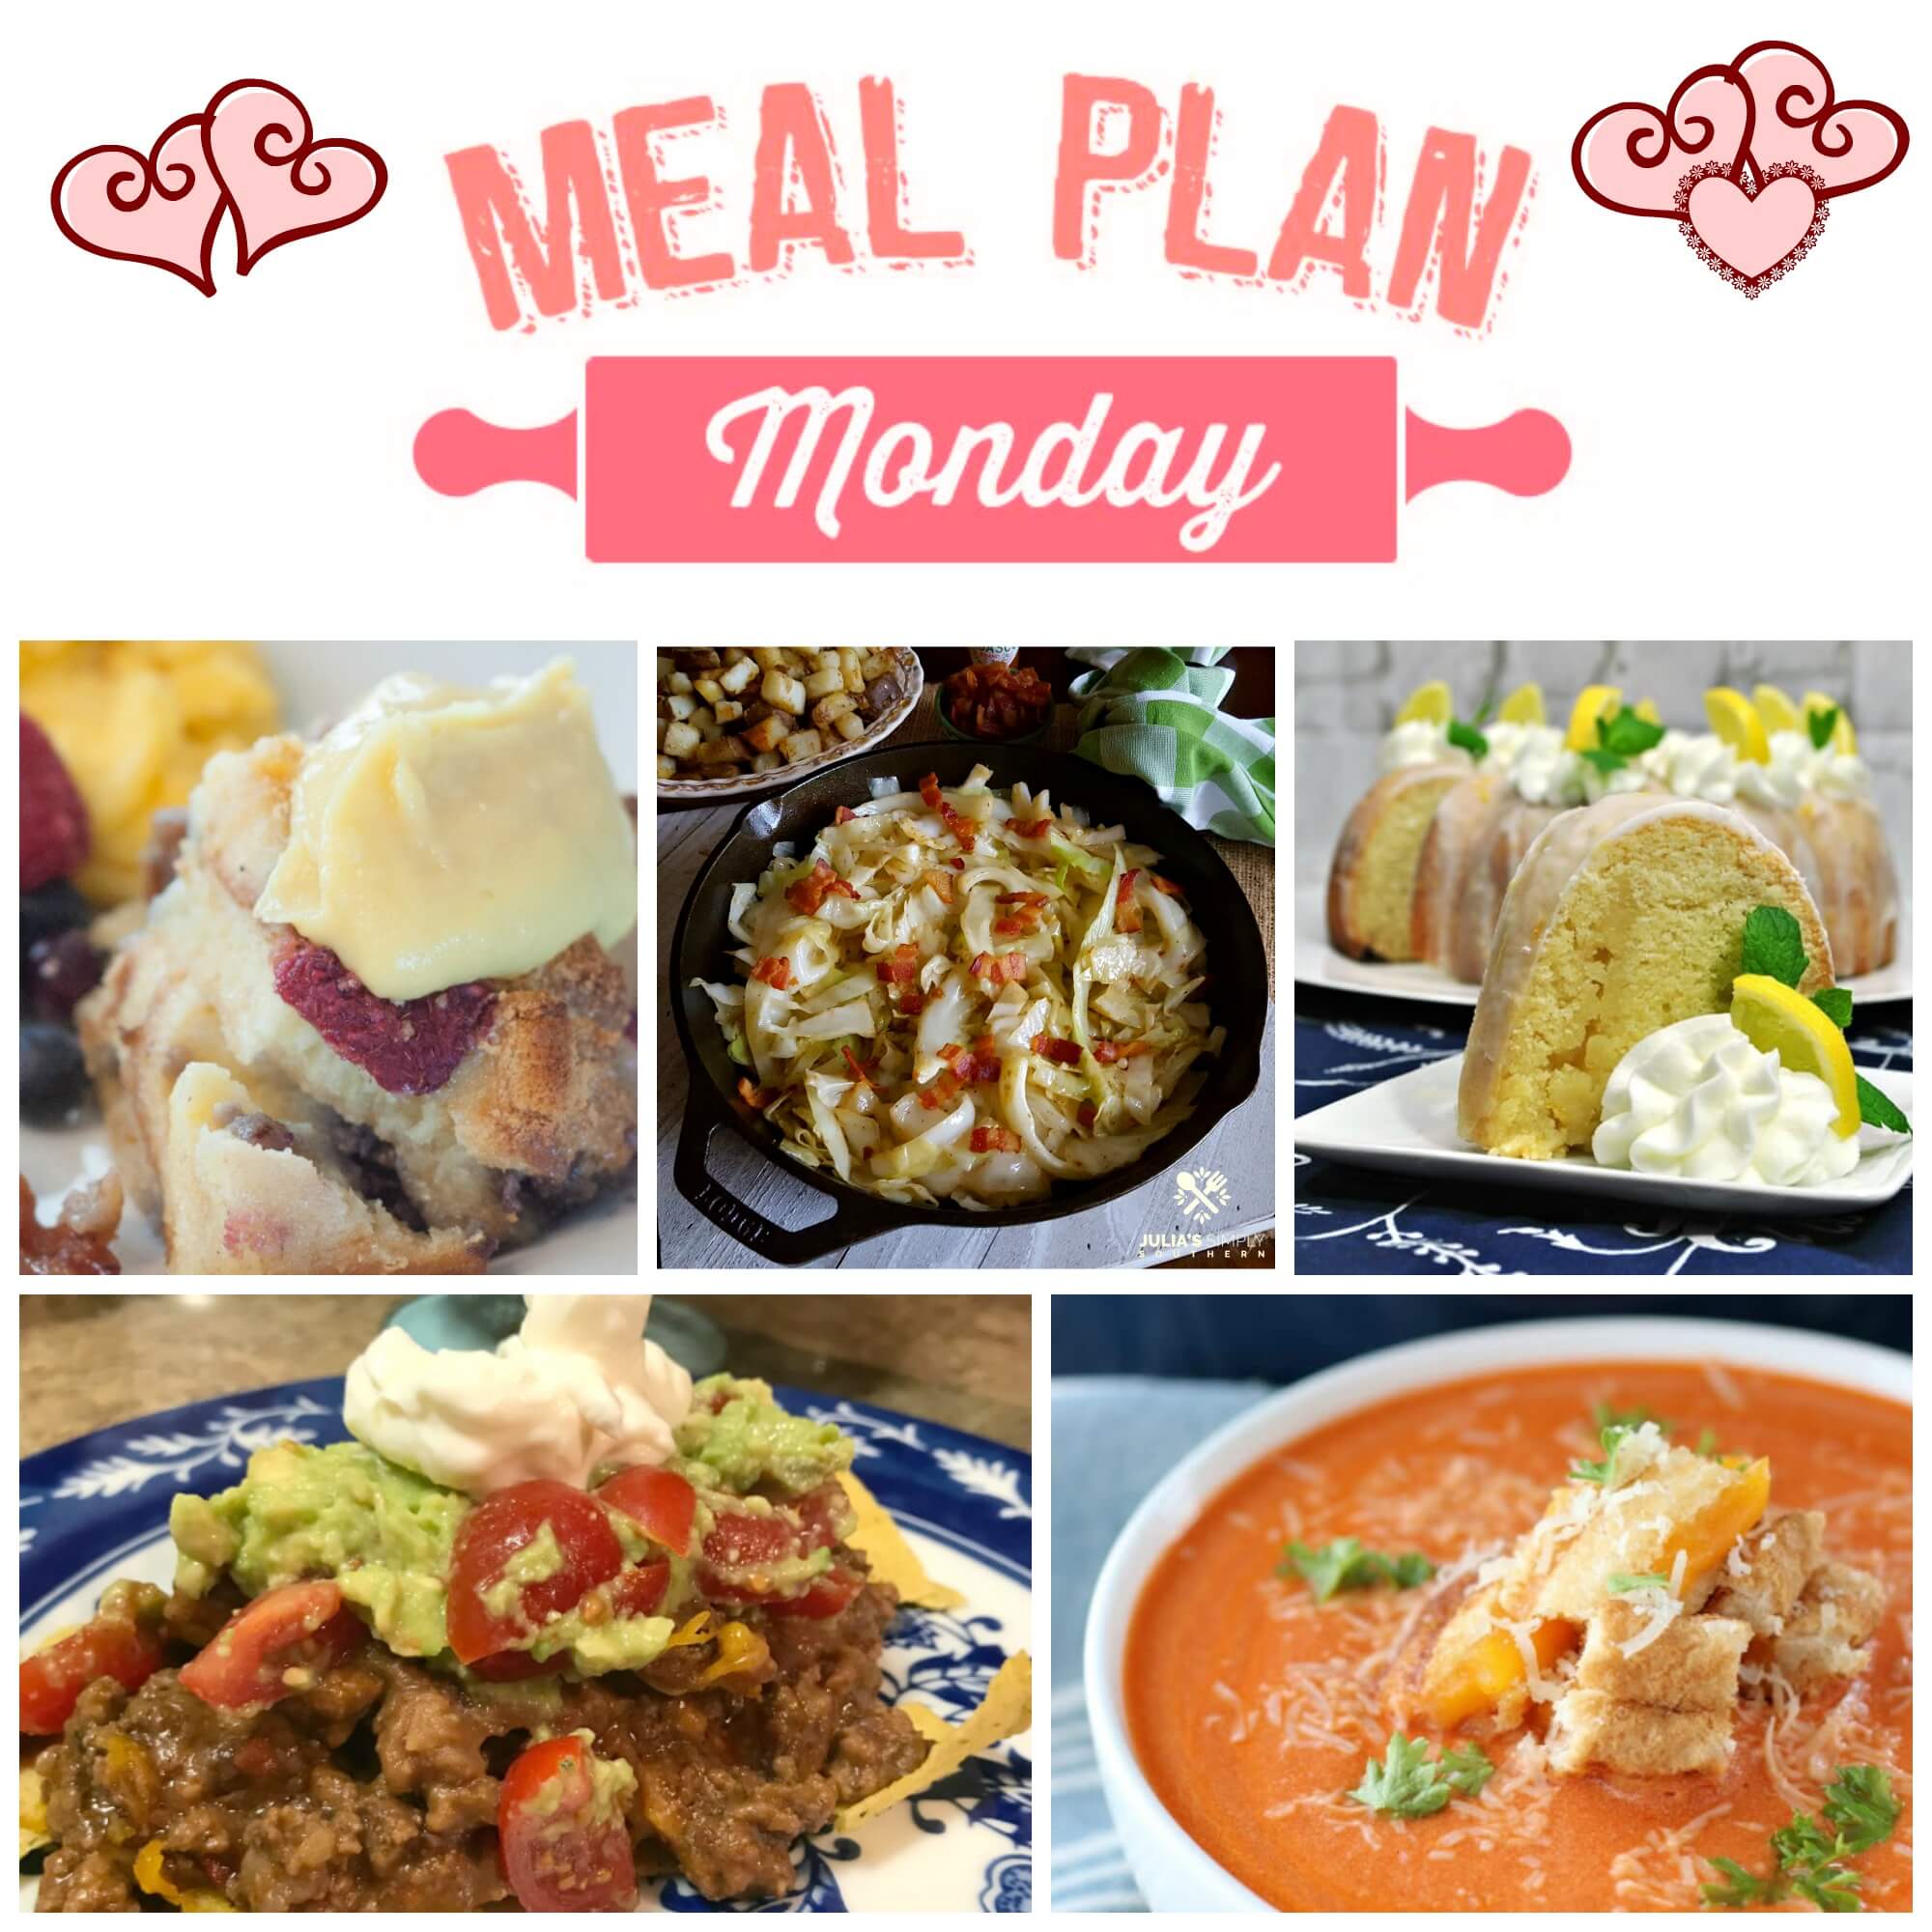 Meal Plan Monday #149 - Free meal planning recipes - Taco Casserole, Mickey